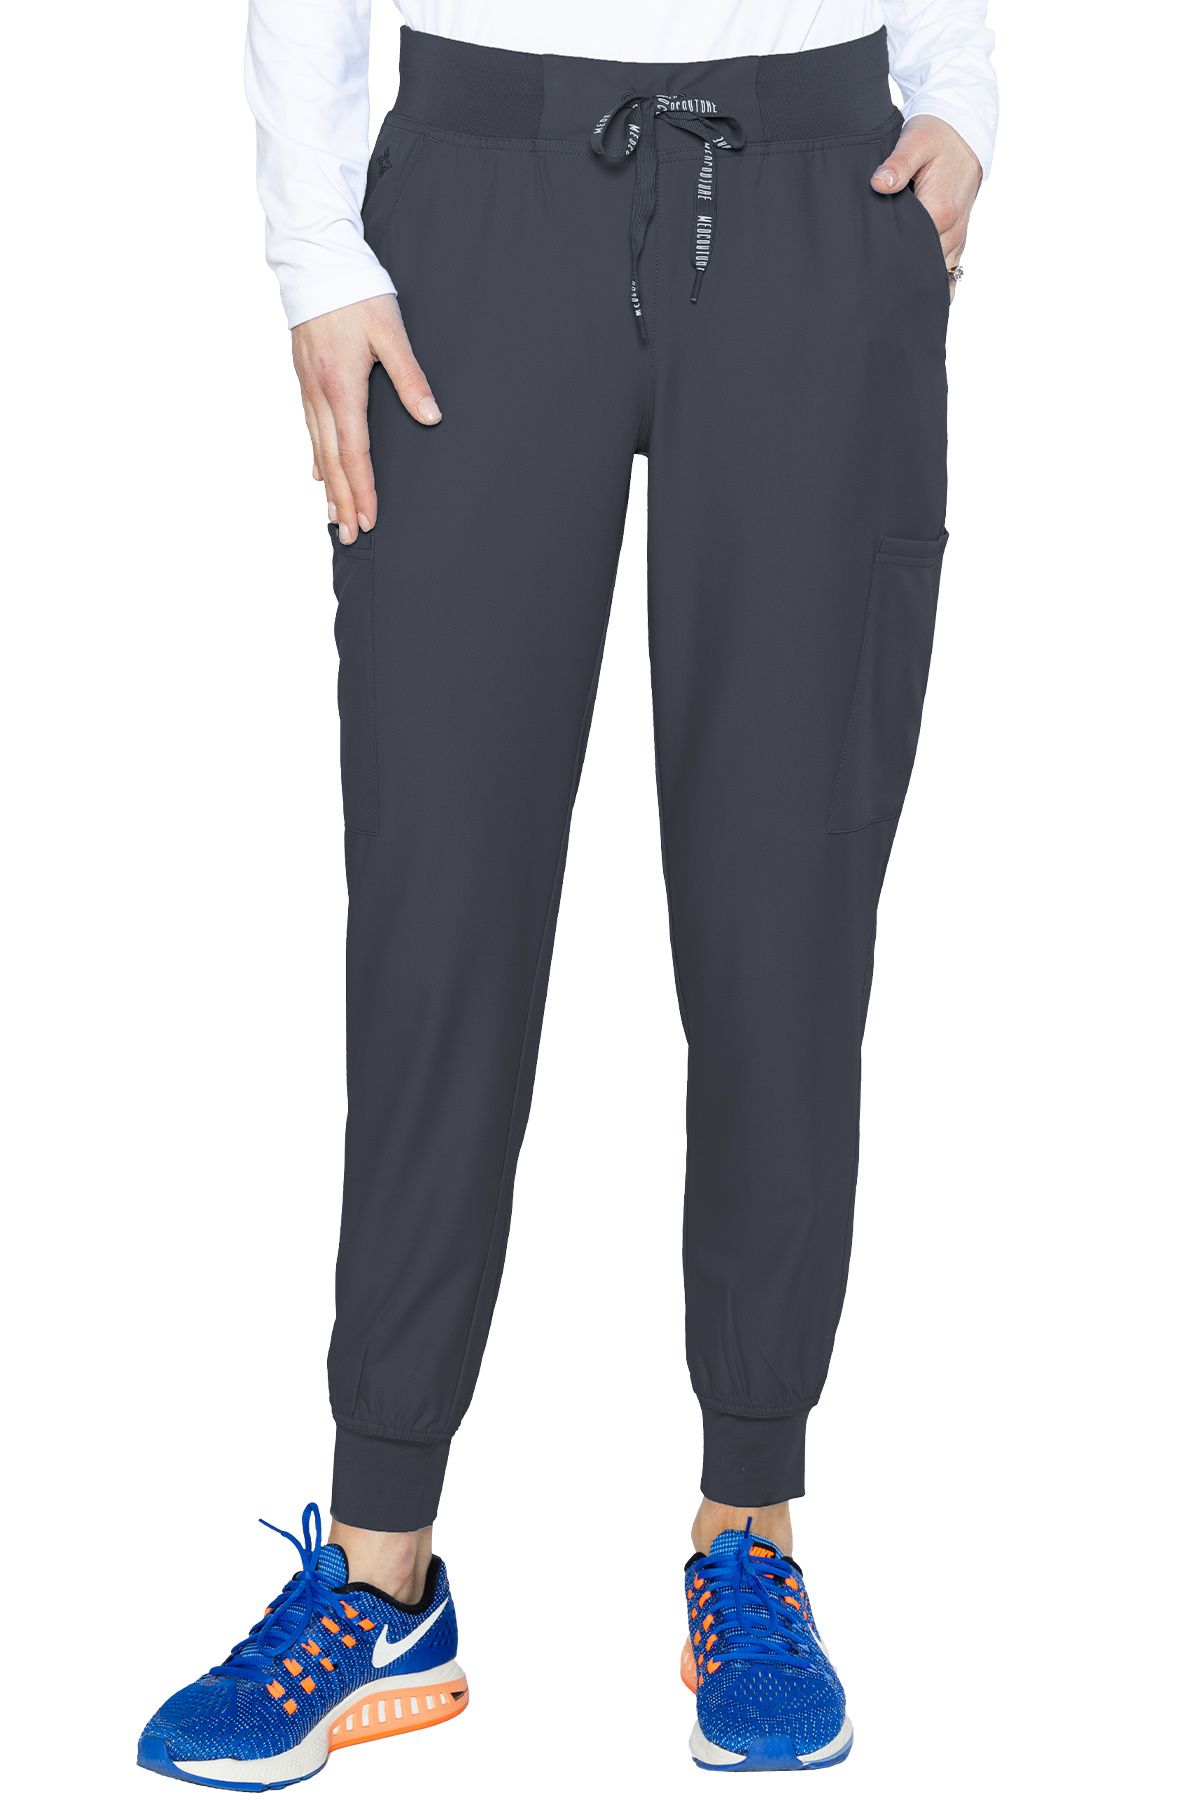 Med Couture Women's Insight Jogger Pant 2711 - CSE Mobility and Scrubs